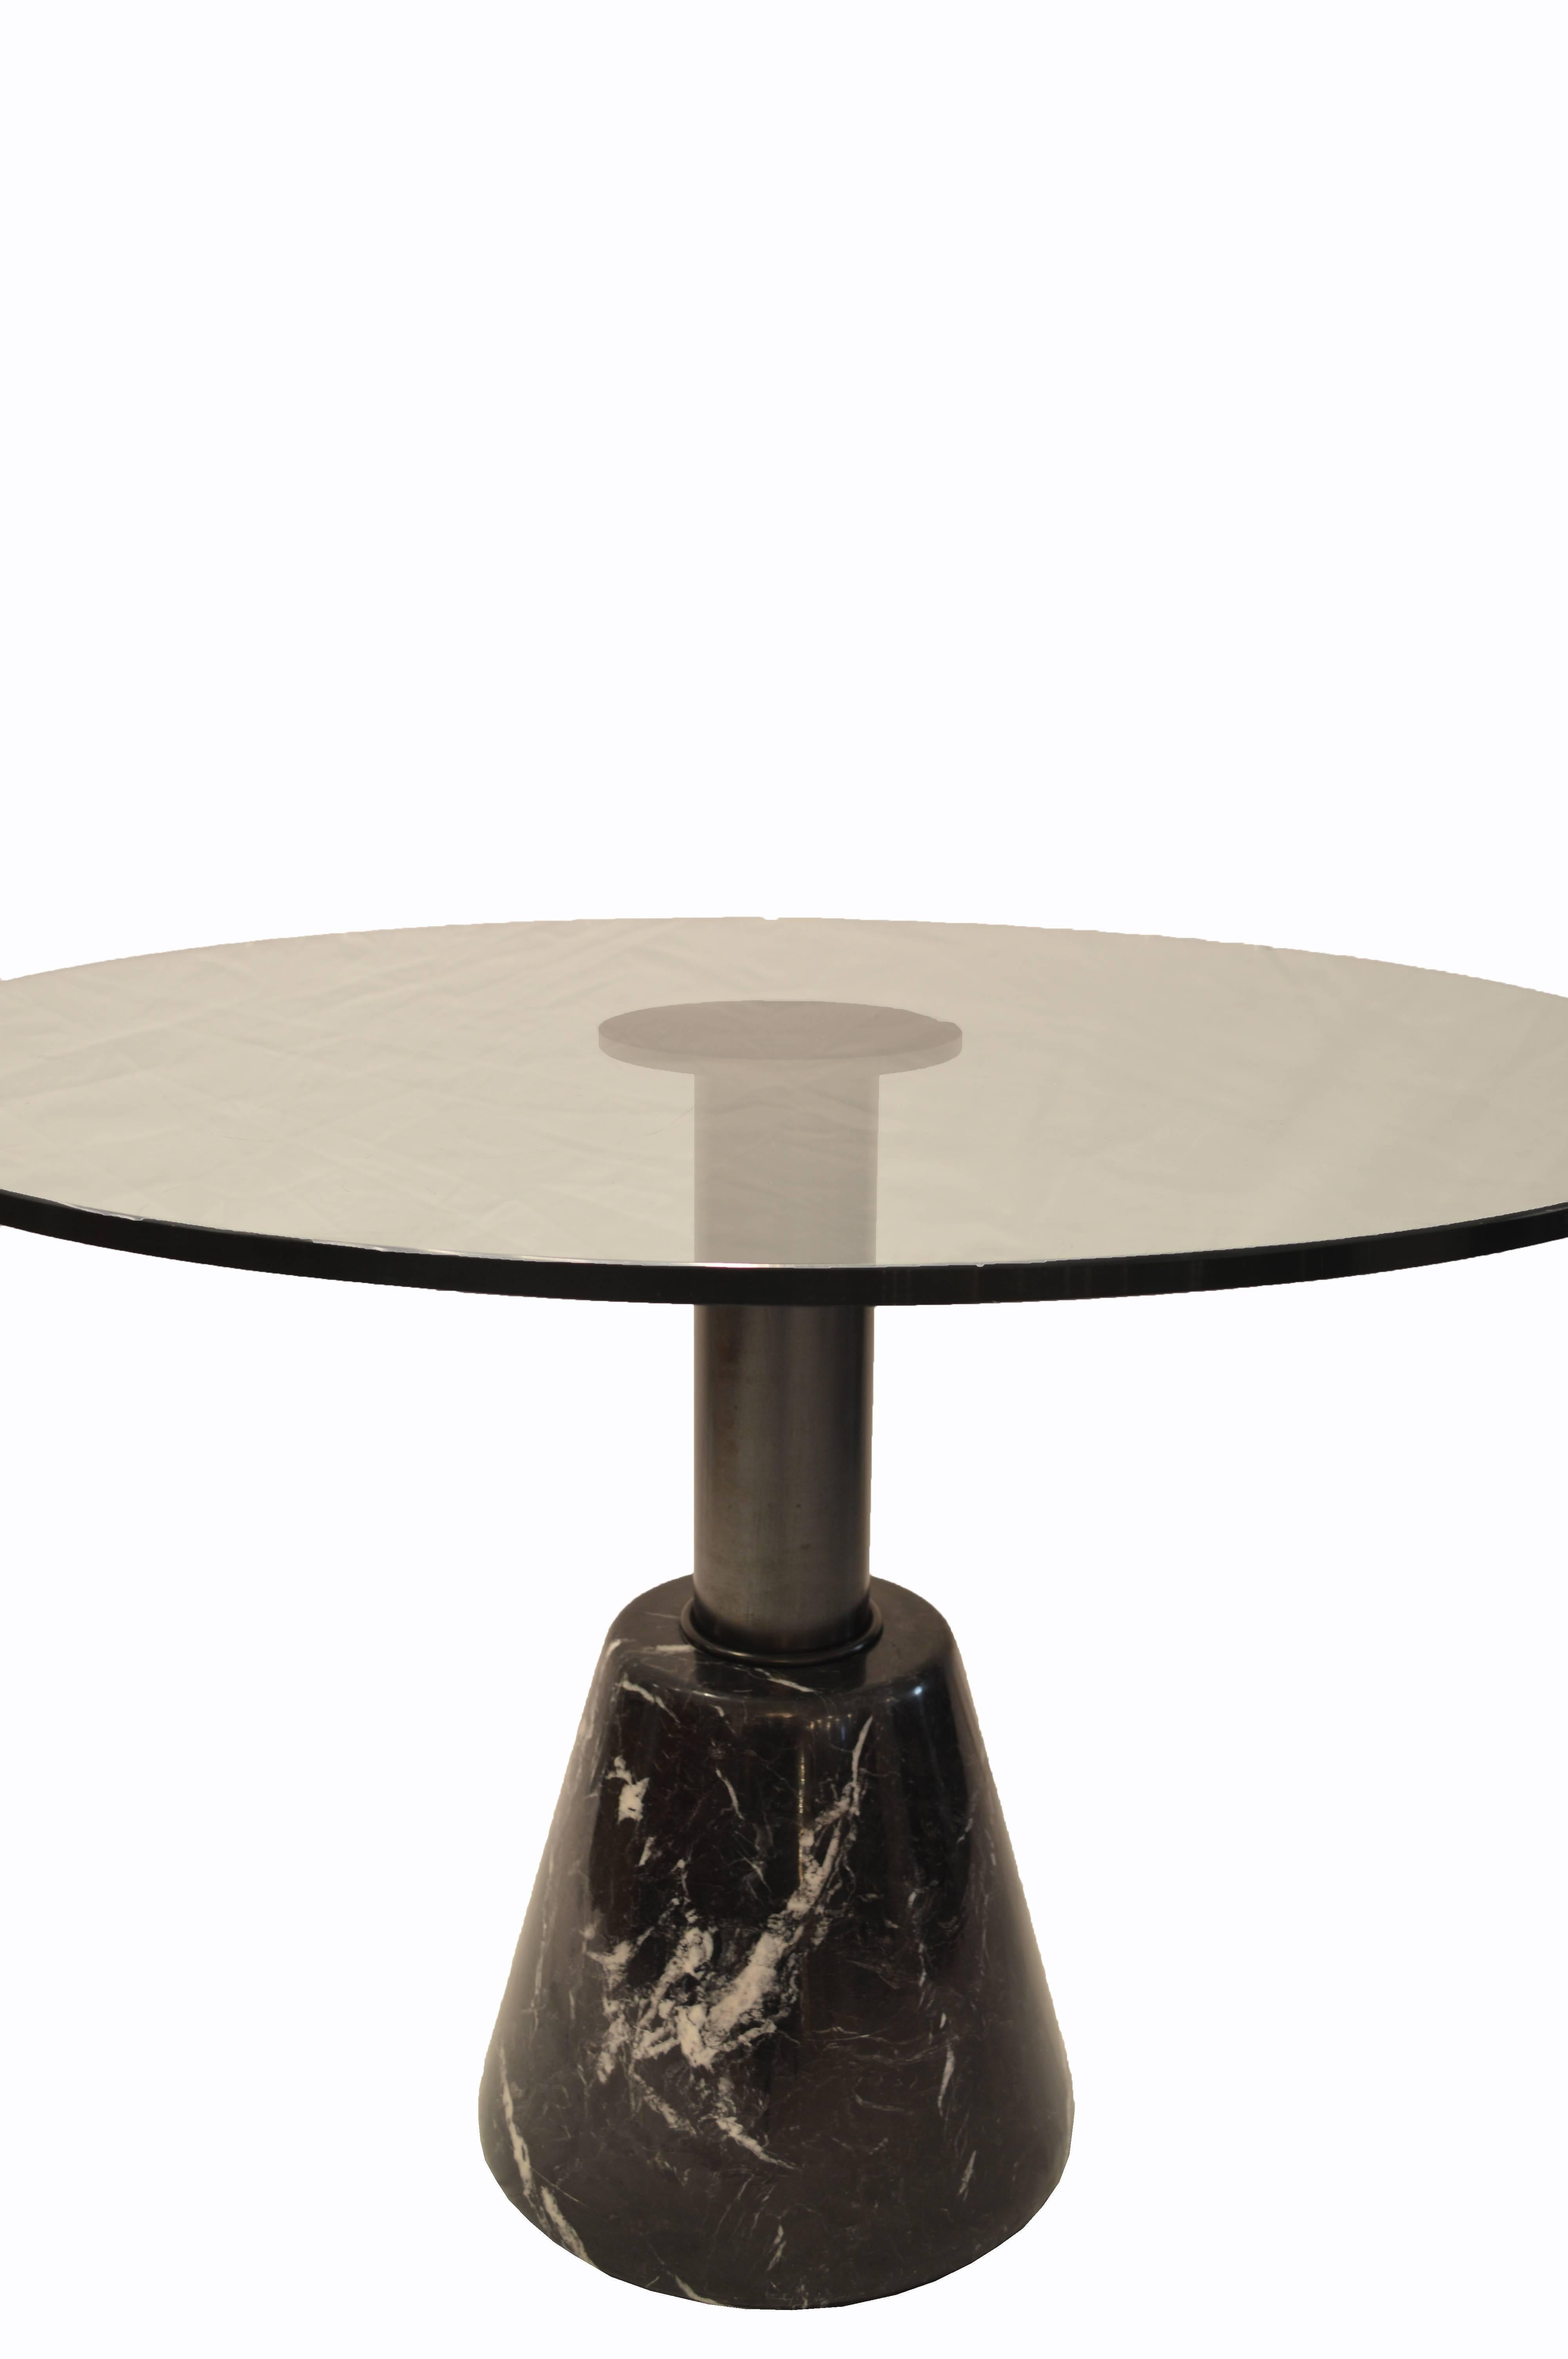 Round glass table with marble base and steel column designed by Giotto Stoppino for Acerbis International in Italy. This piece is labeled on the base. Measures: 40